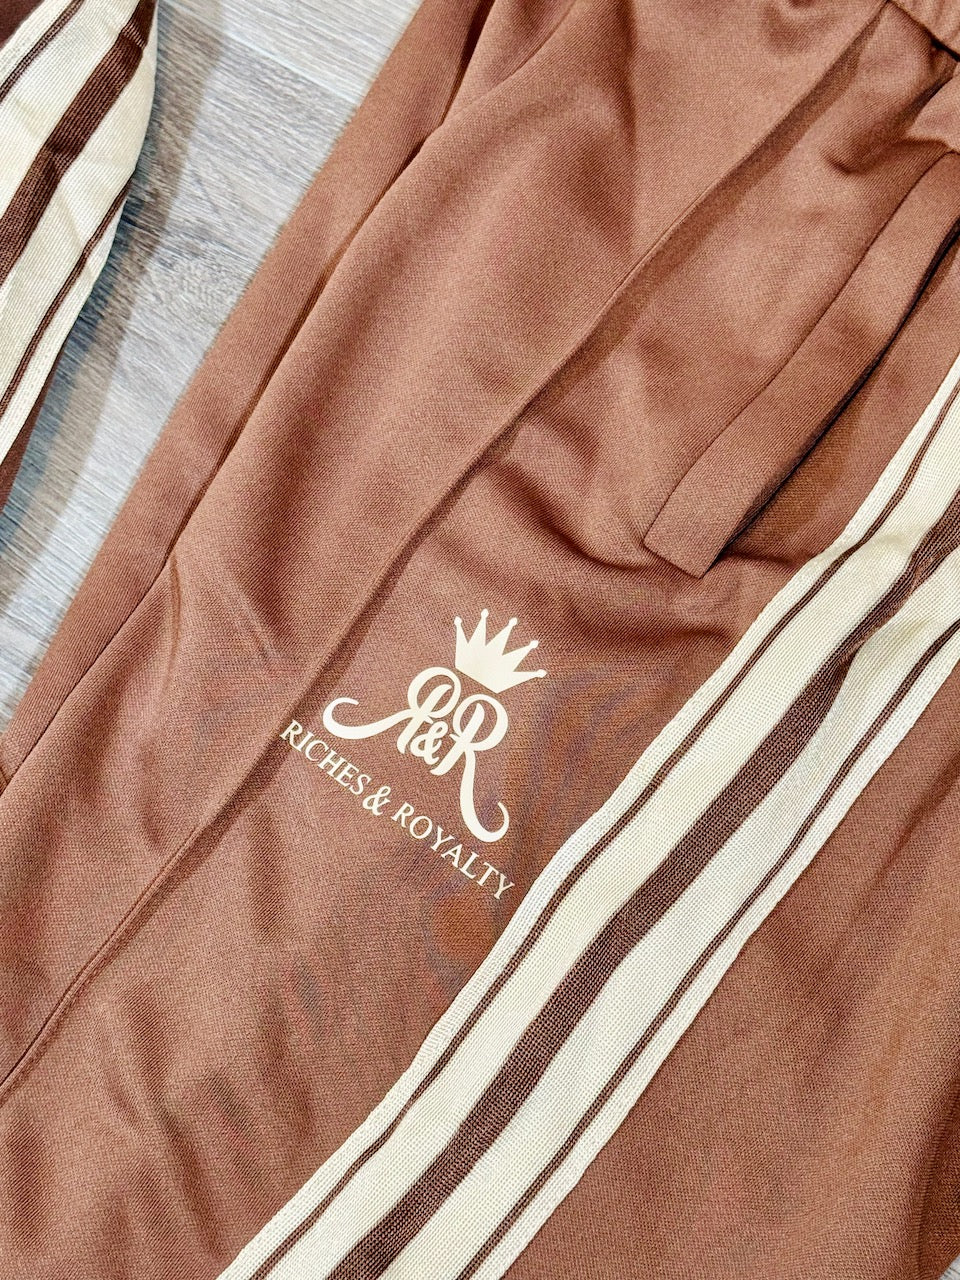 R&R Emblem Sweatsuit Set - Brown and Off White